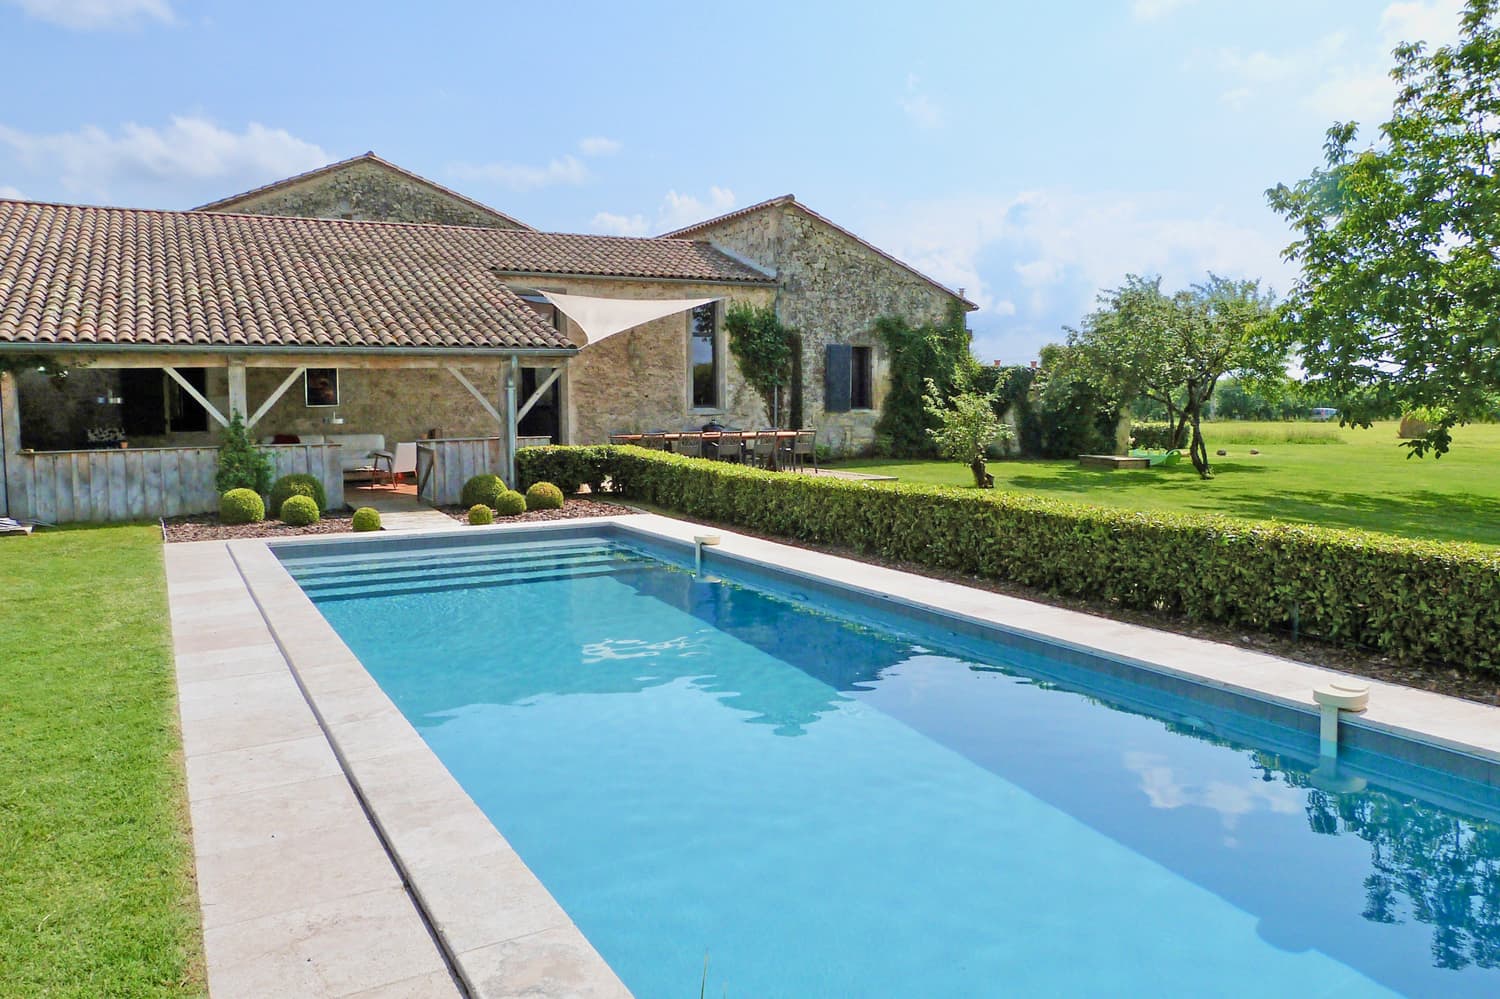 Holiday rental accommodation in Dordogne with private swimming pool | Mounicat